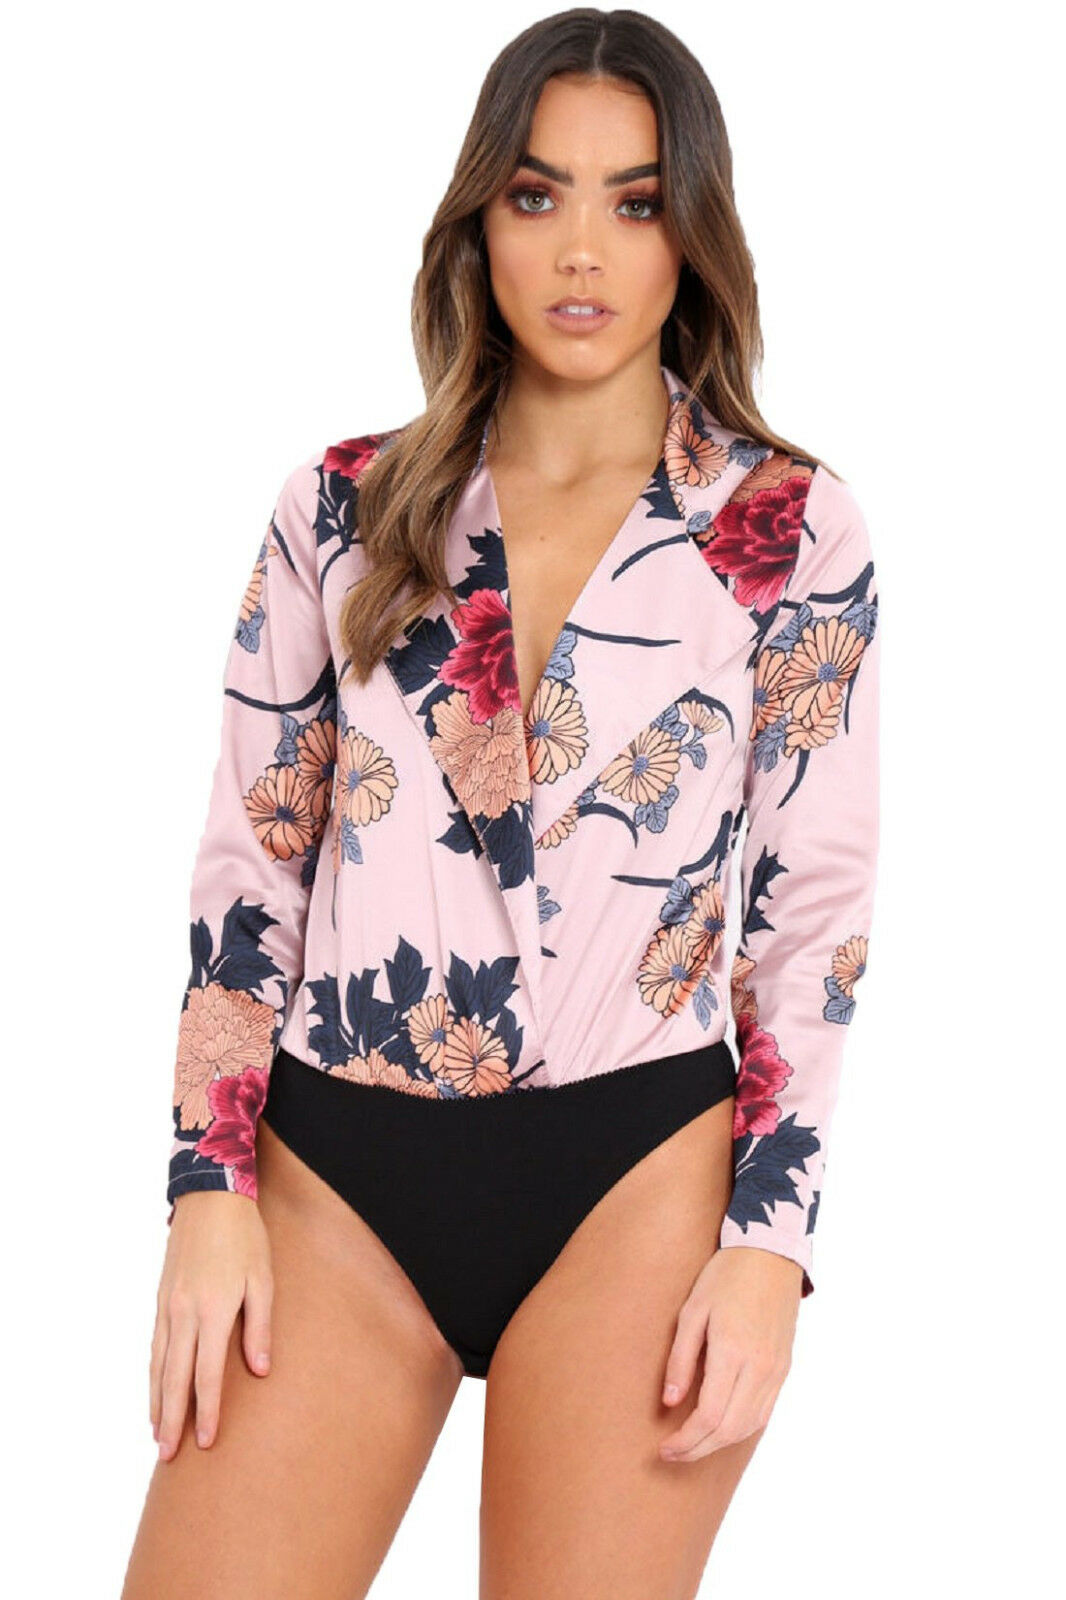 Ladies Dusty Pink Plunge Neck Long Sleeve Floral Body Suit.